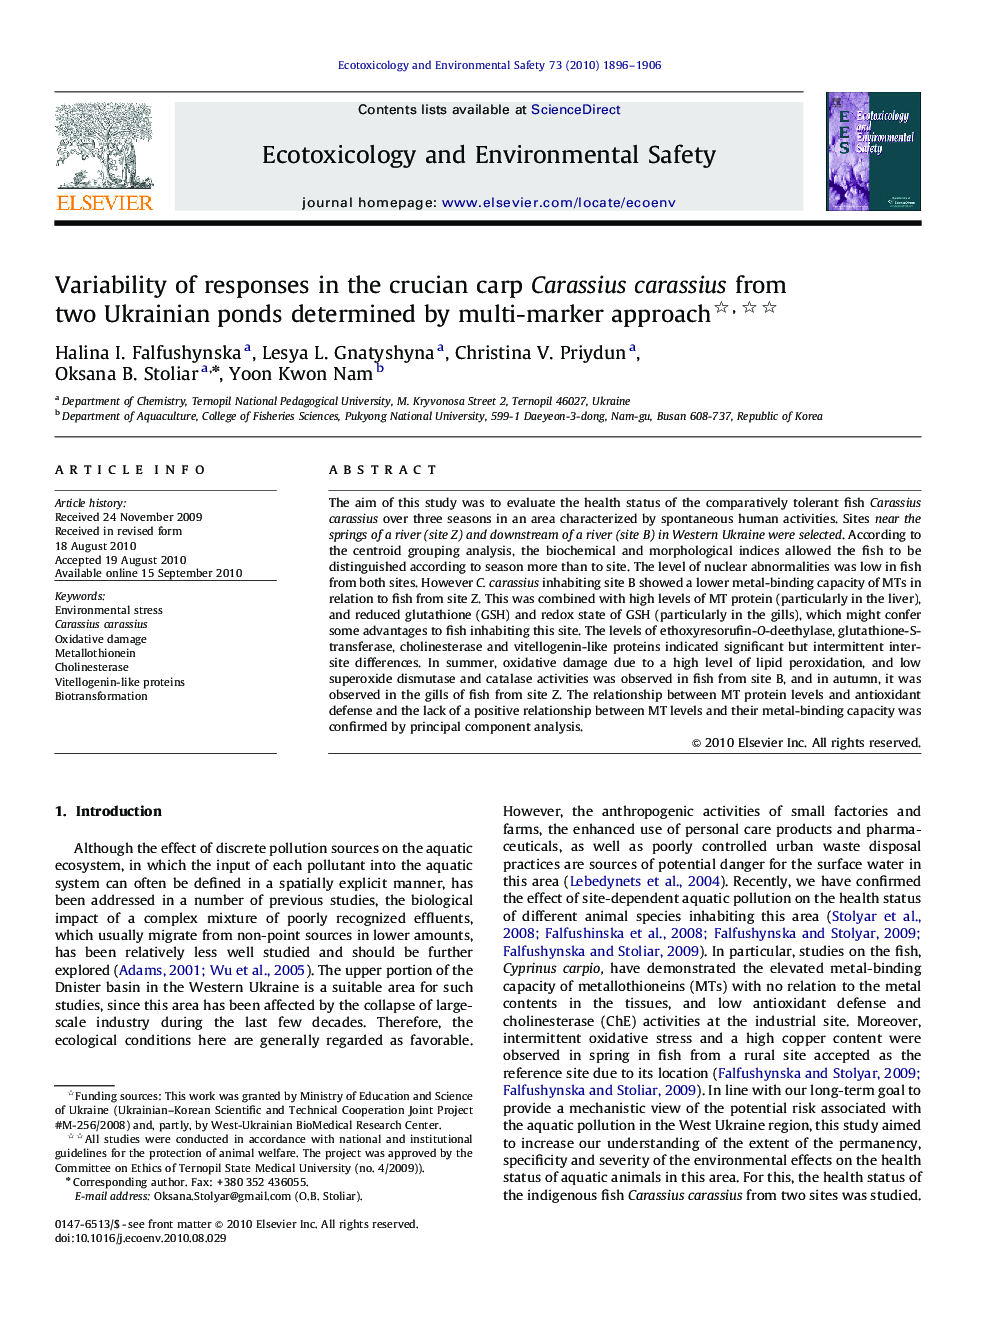 Variability of responses in the crucian carp Carassius carassius from two Ukrainian ponds determined by multi-marker approach 